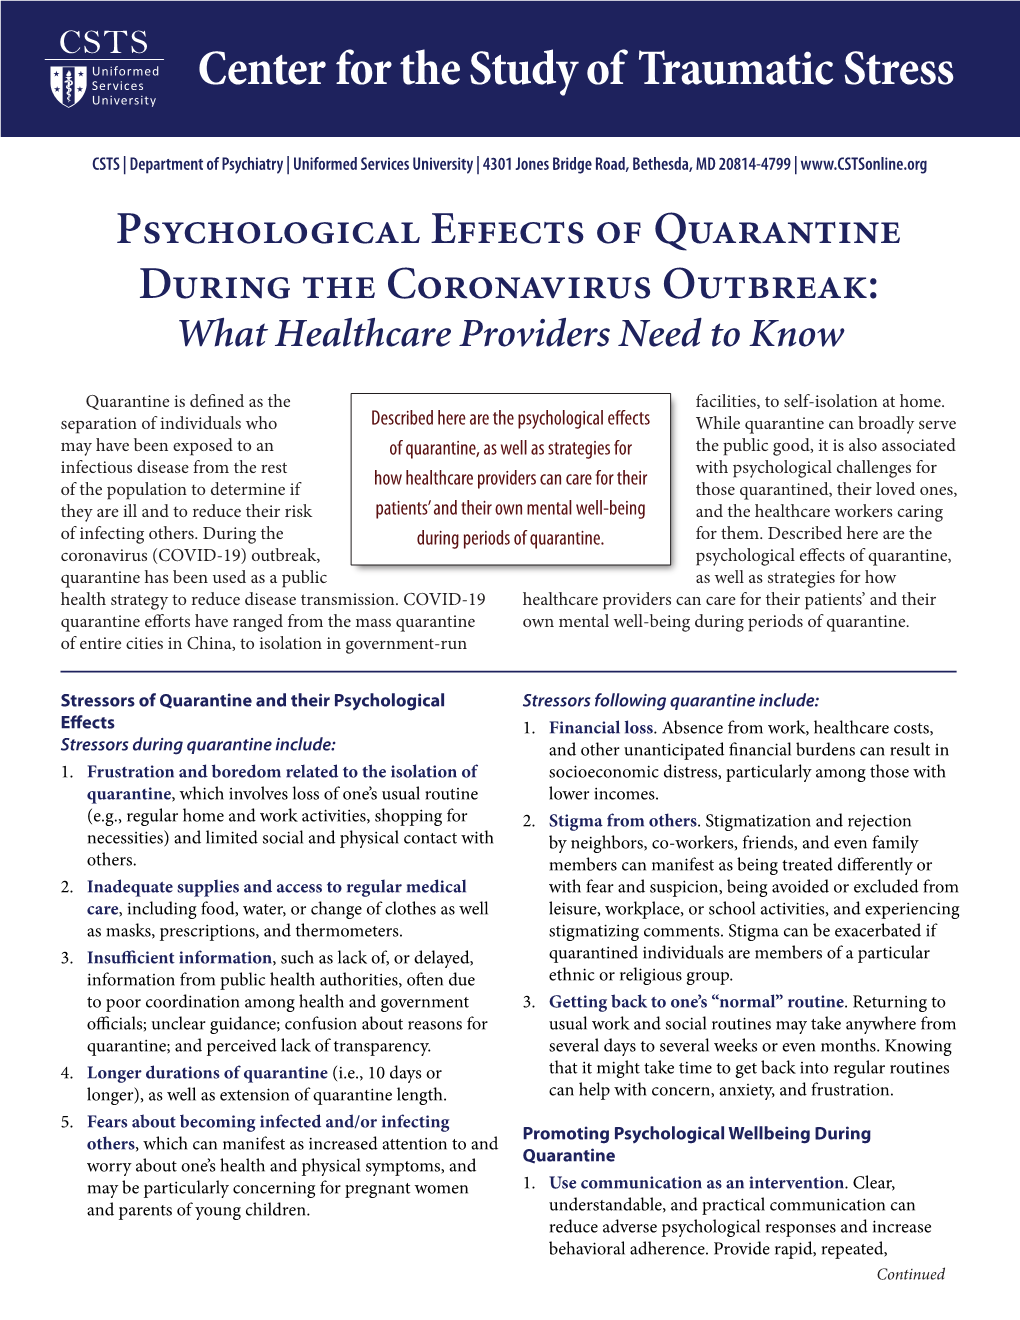 Psychological Effects of Quarantine During the Coronavirus Outbreak: What Healthcare Providers Need to Know